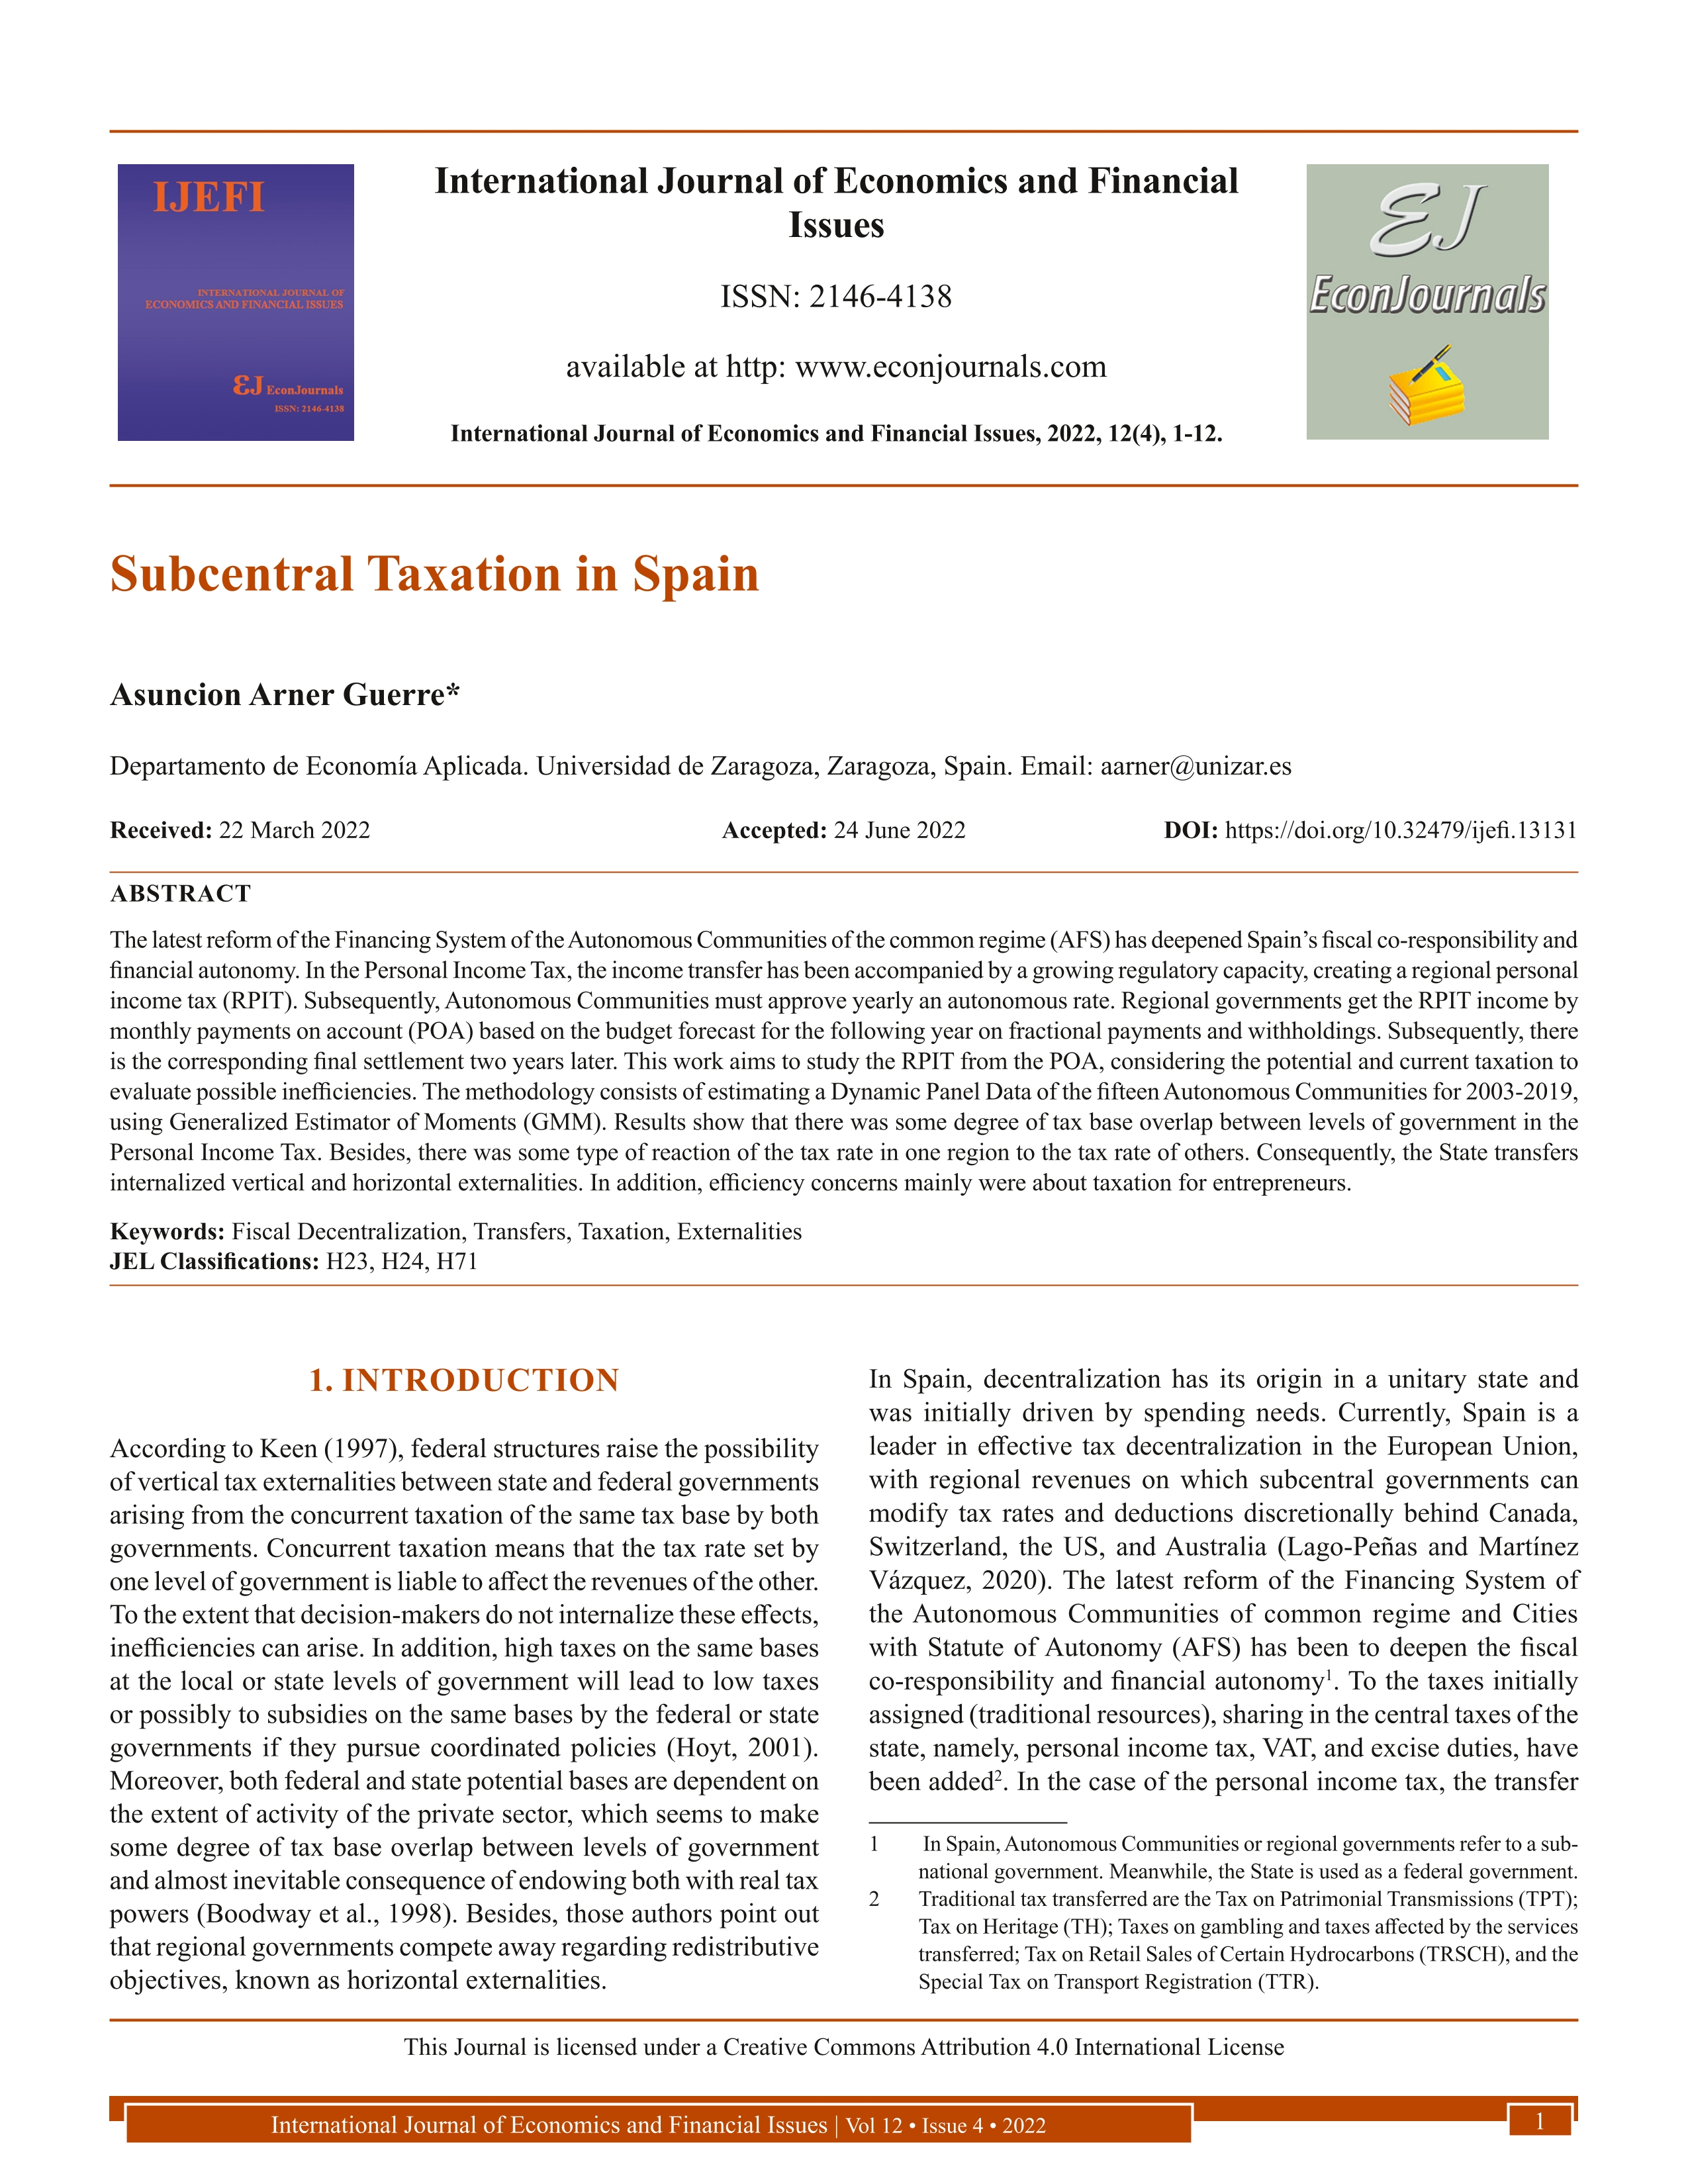 Subcentral taxation in Spain